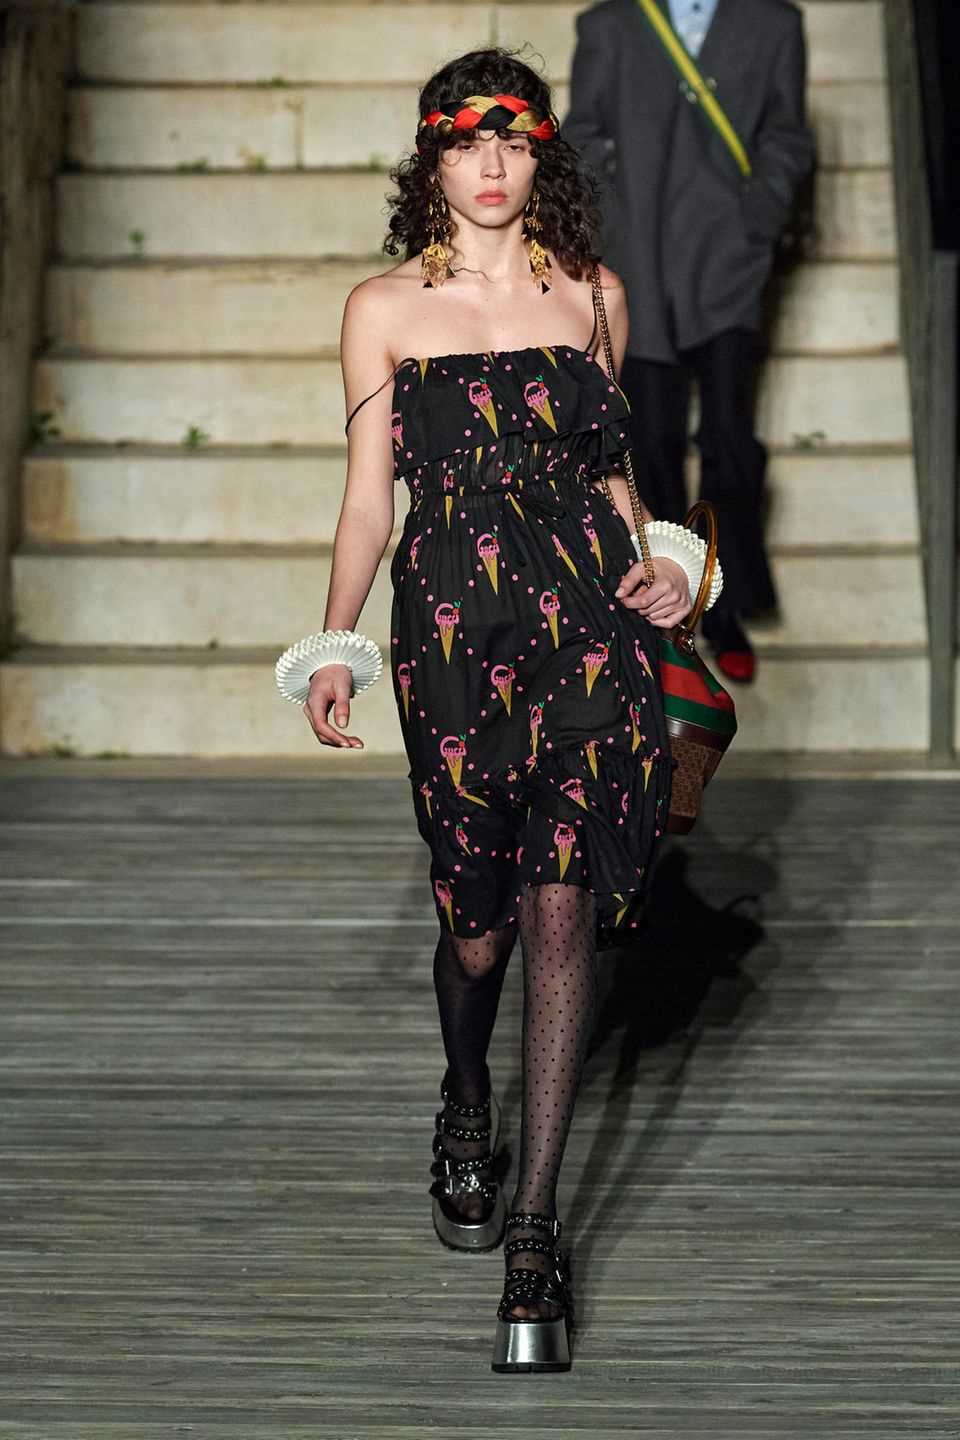 It's going to be colourful: headband at the Gucci Resort Women Off Season Show 2023.